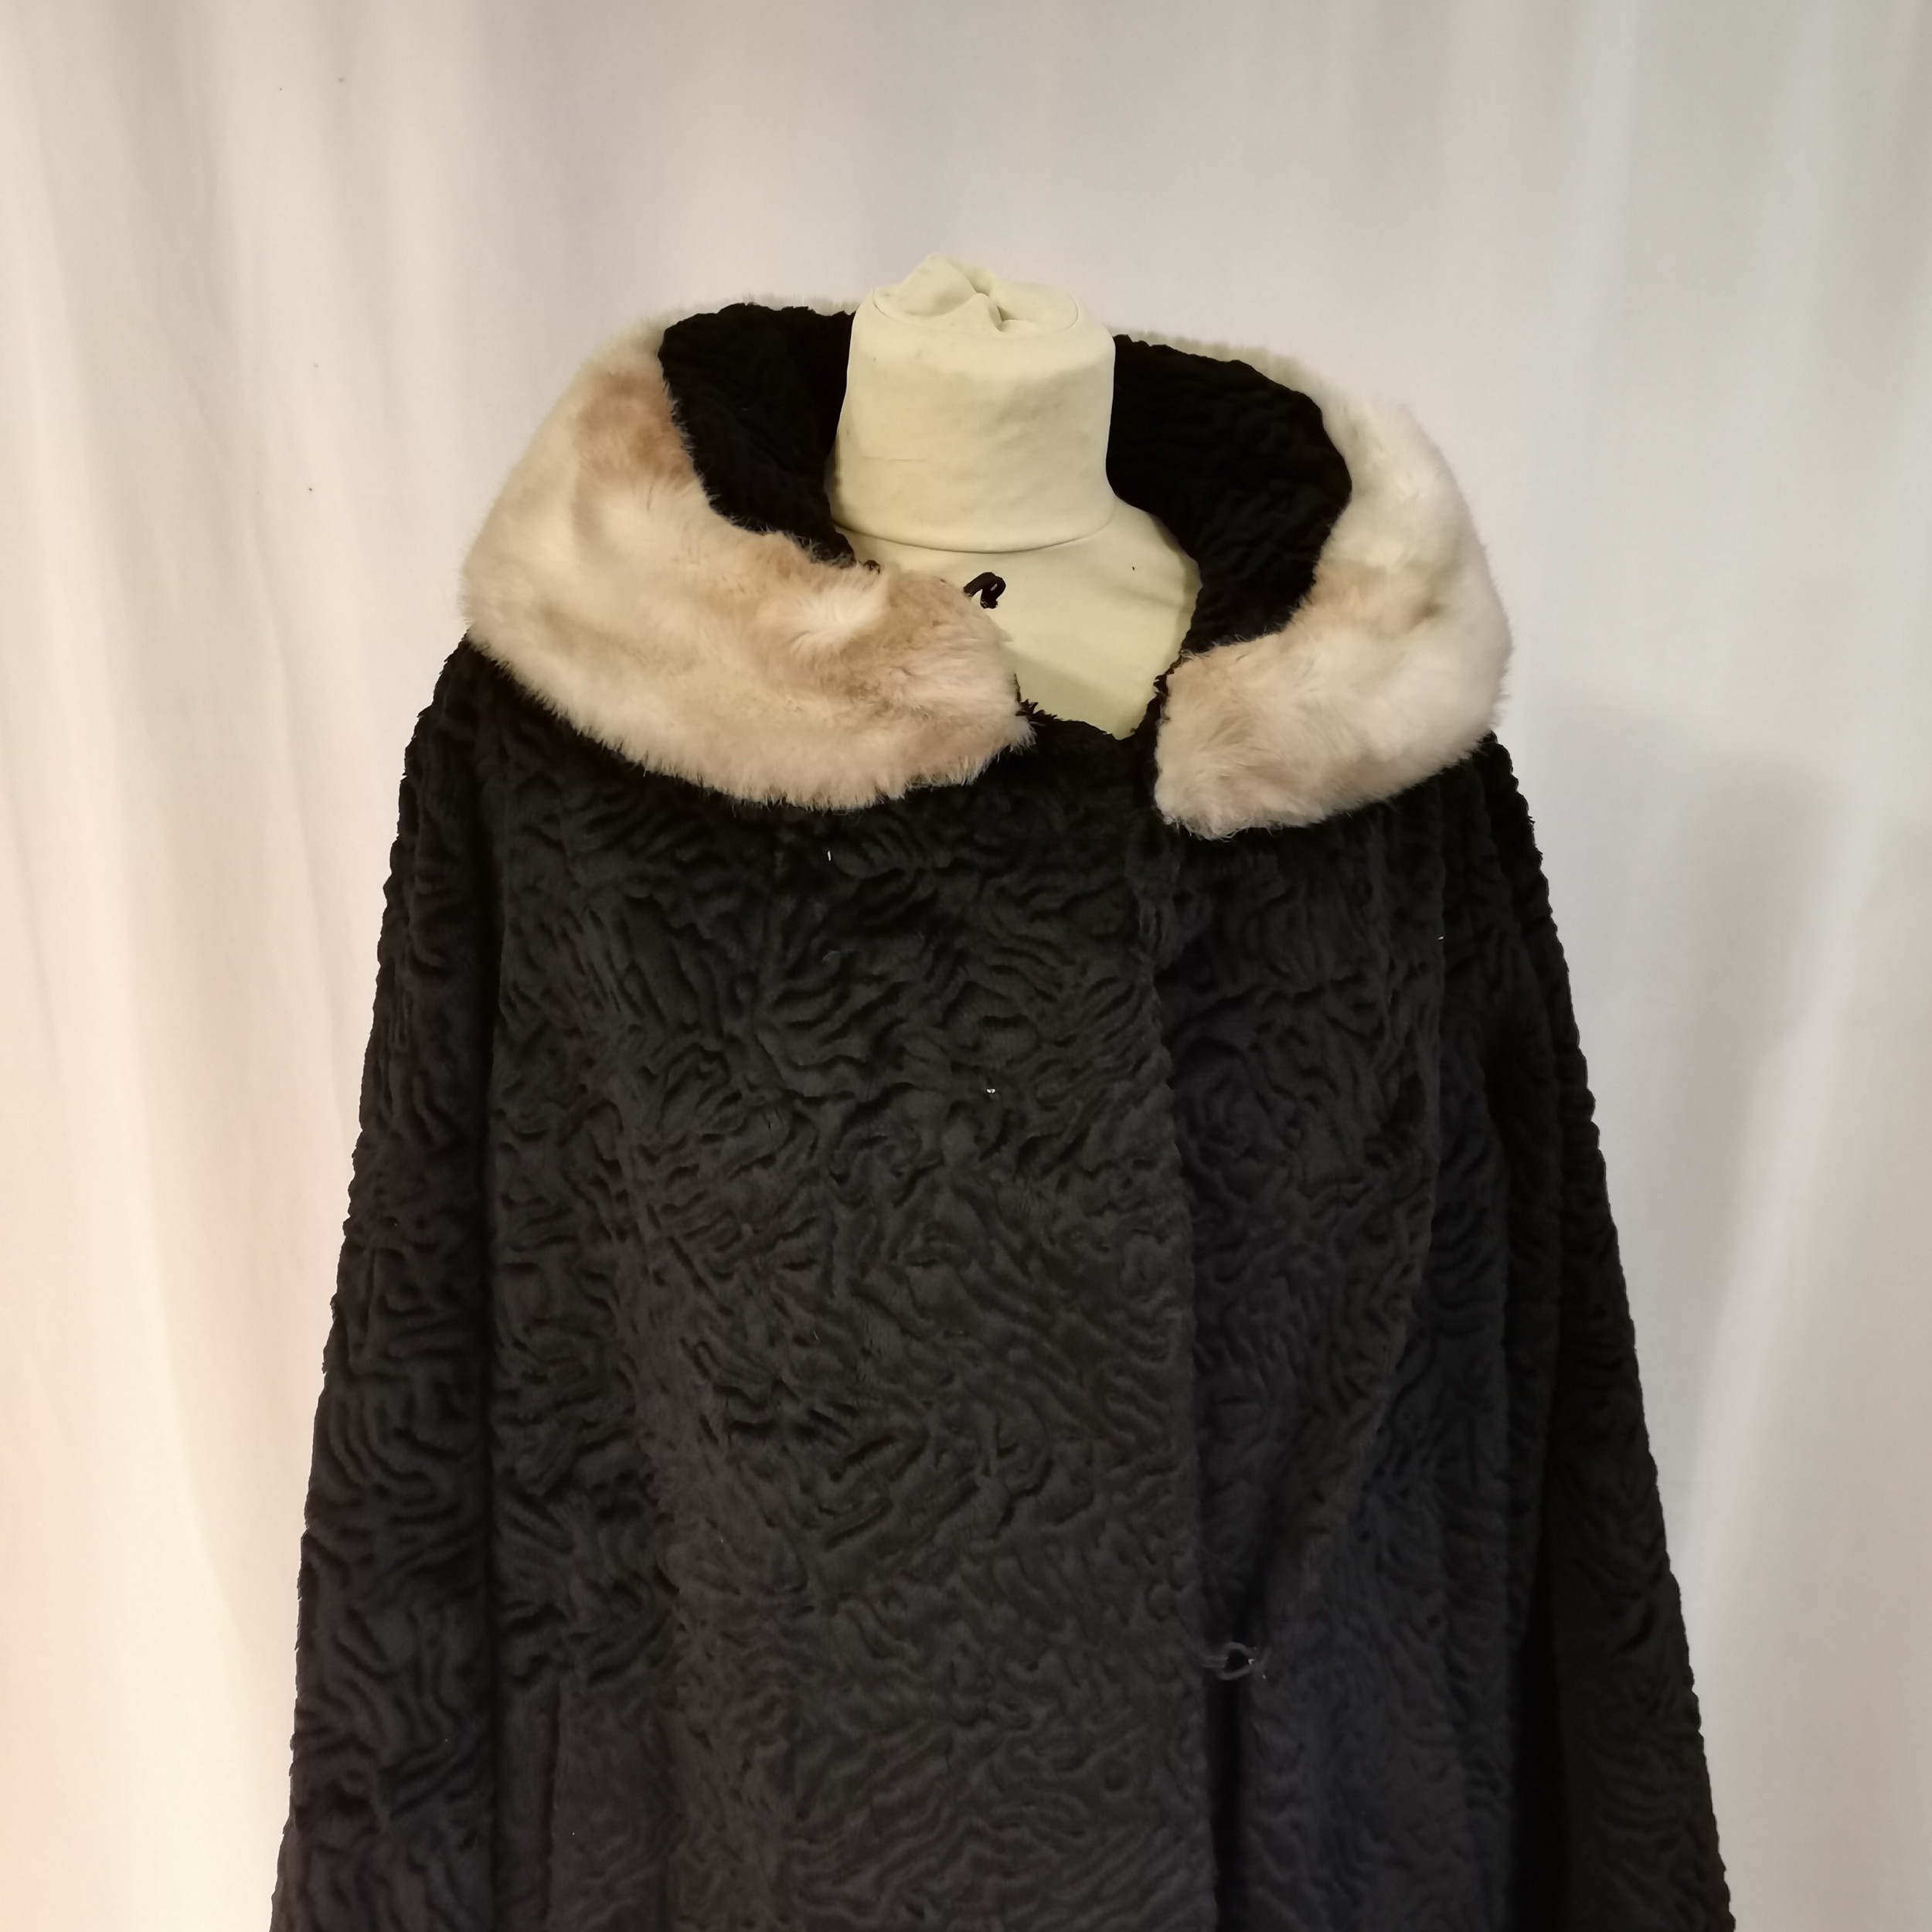 1950s Black astrakhan coat with faux fur collar good worn condition with slight damaged to fastener. - Image 2 of 3